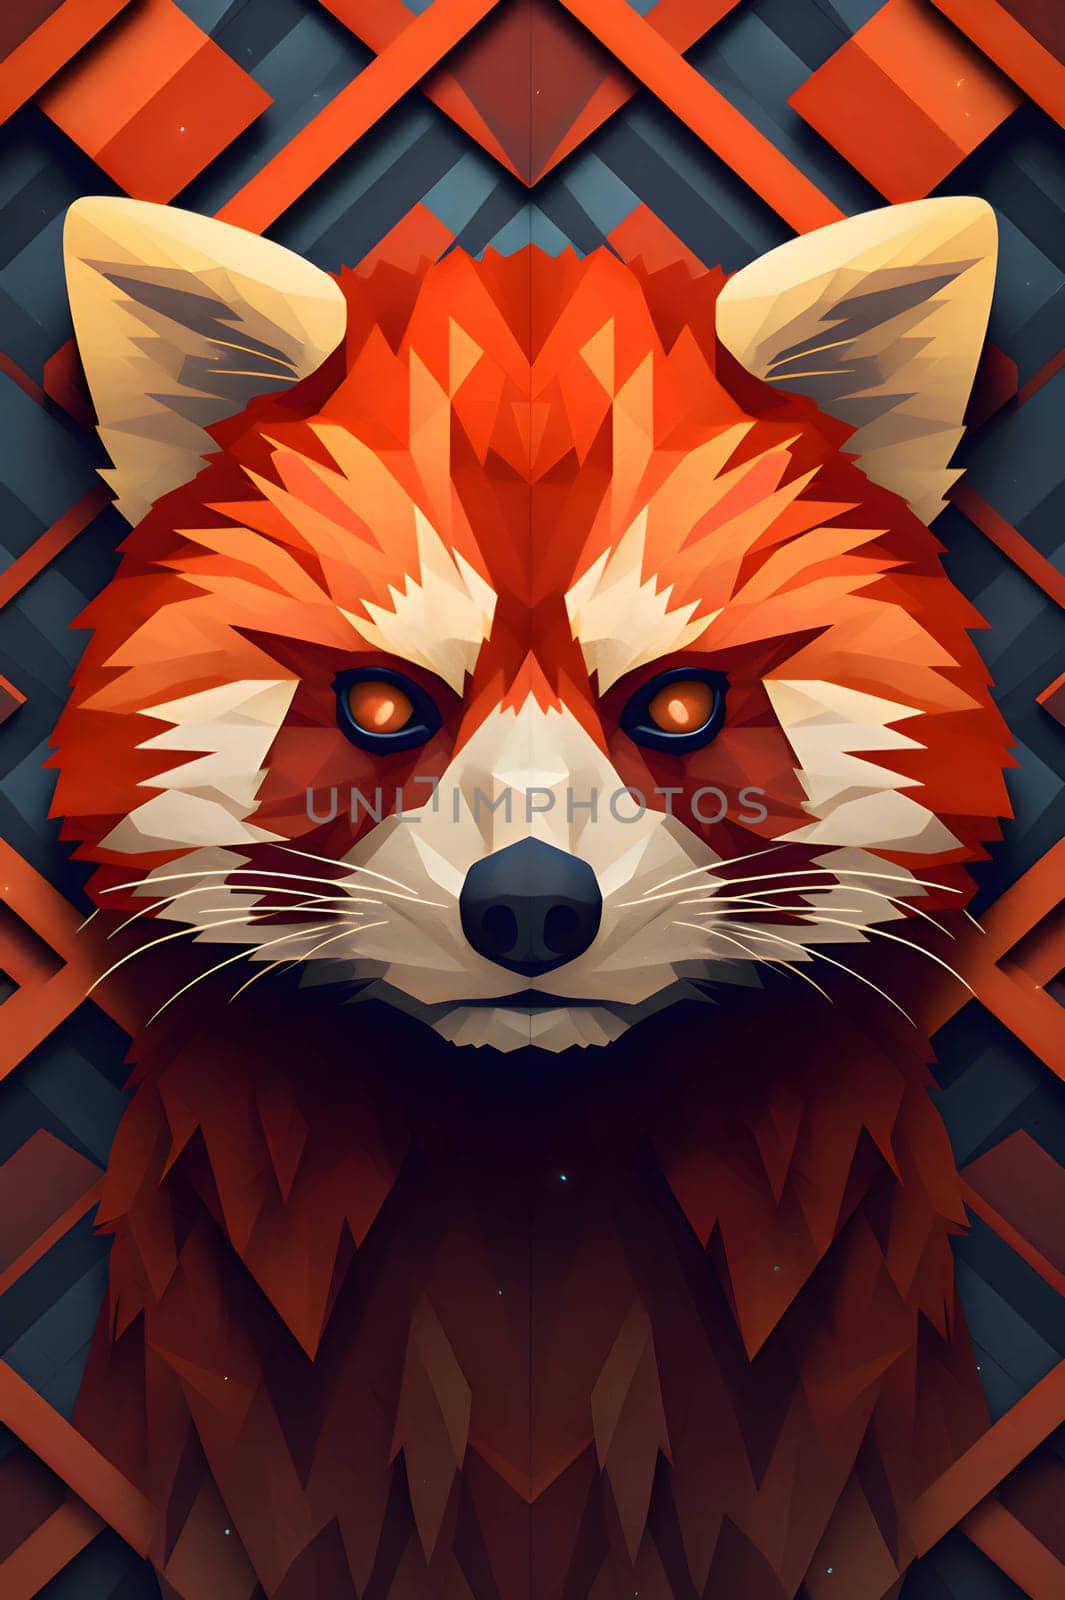 Abstract illustration: Red panda face on the background of geometric pattern. Vector illustration.